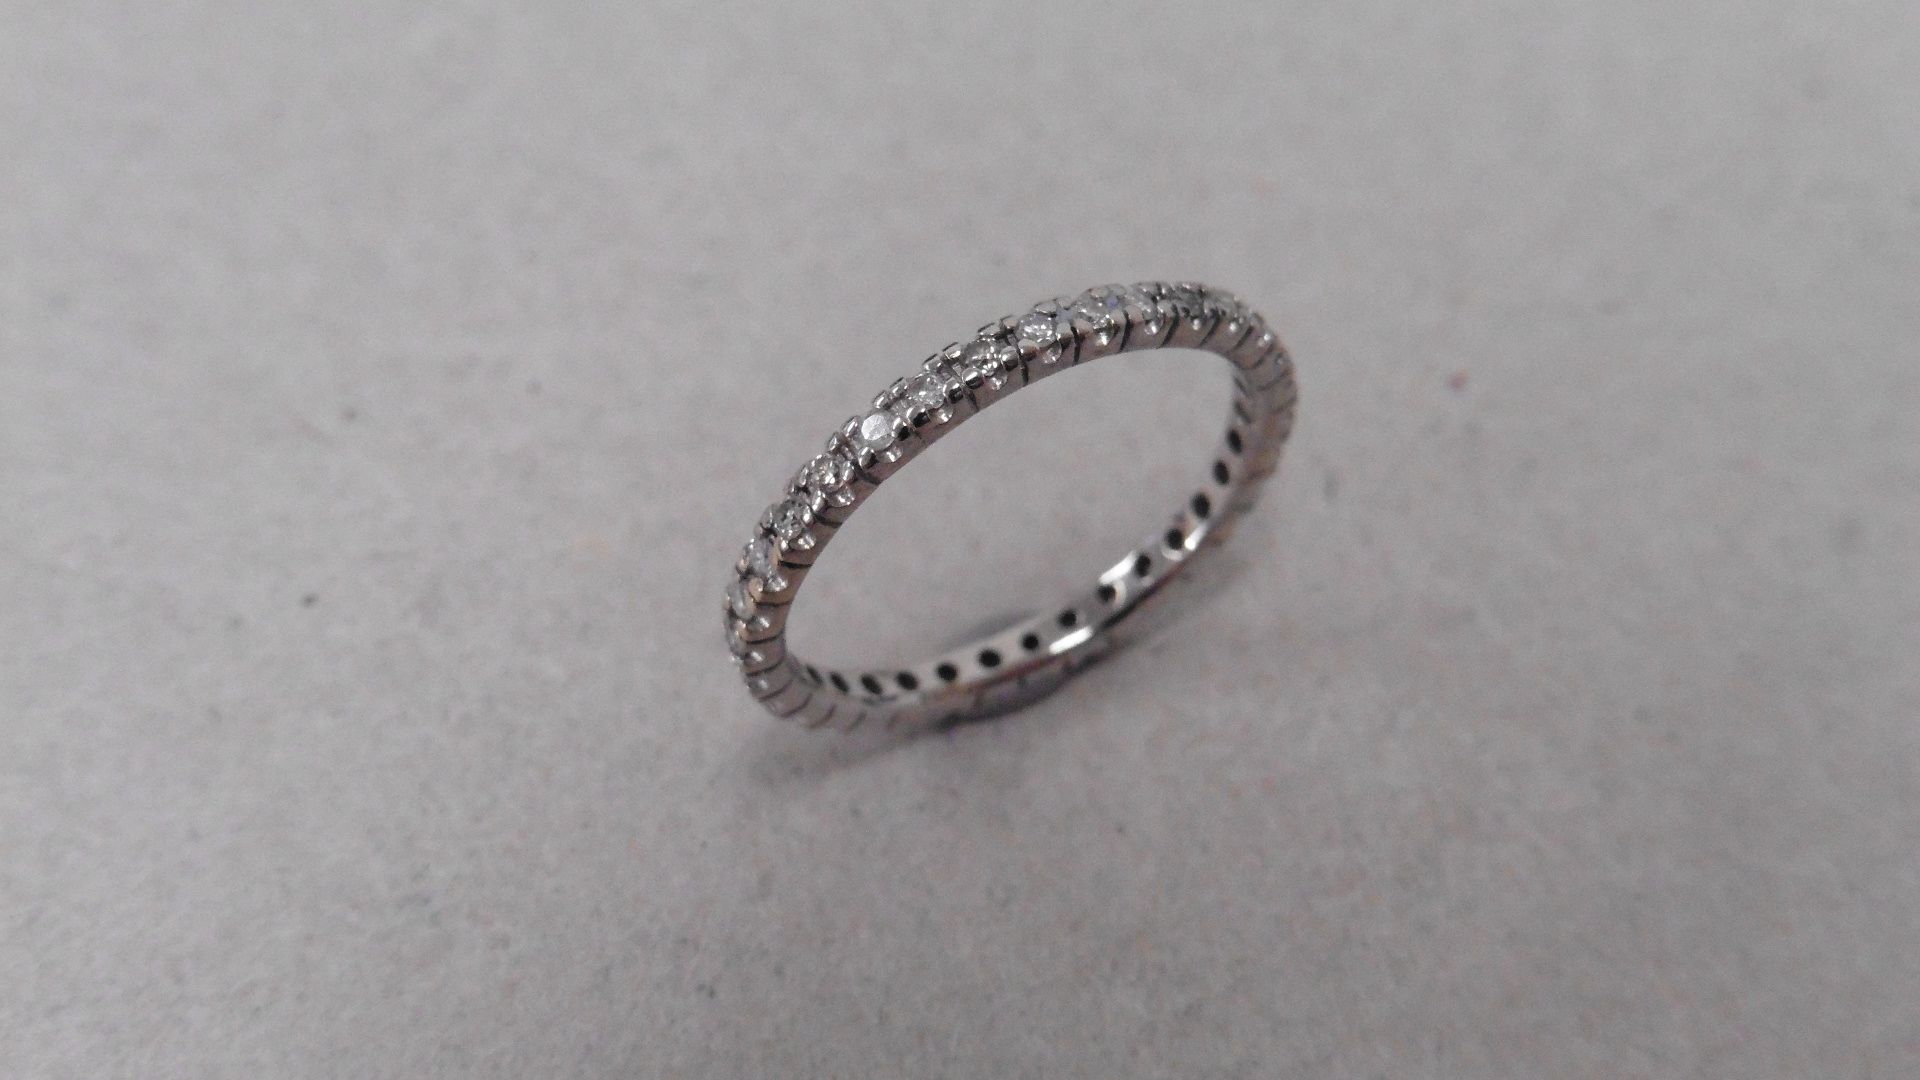 0.26ct diamond set band ring. Brilliant cut diamonds set all the way round in a micro claw